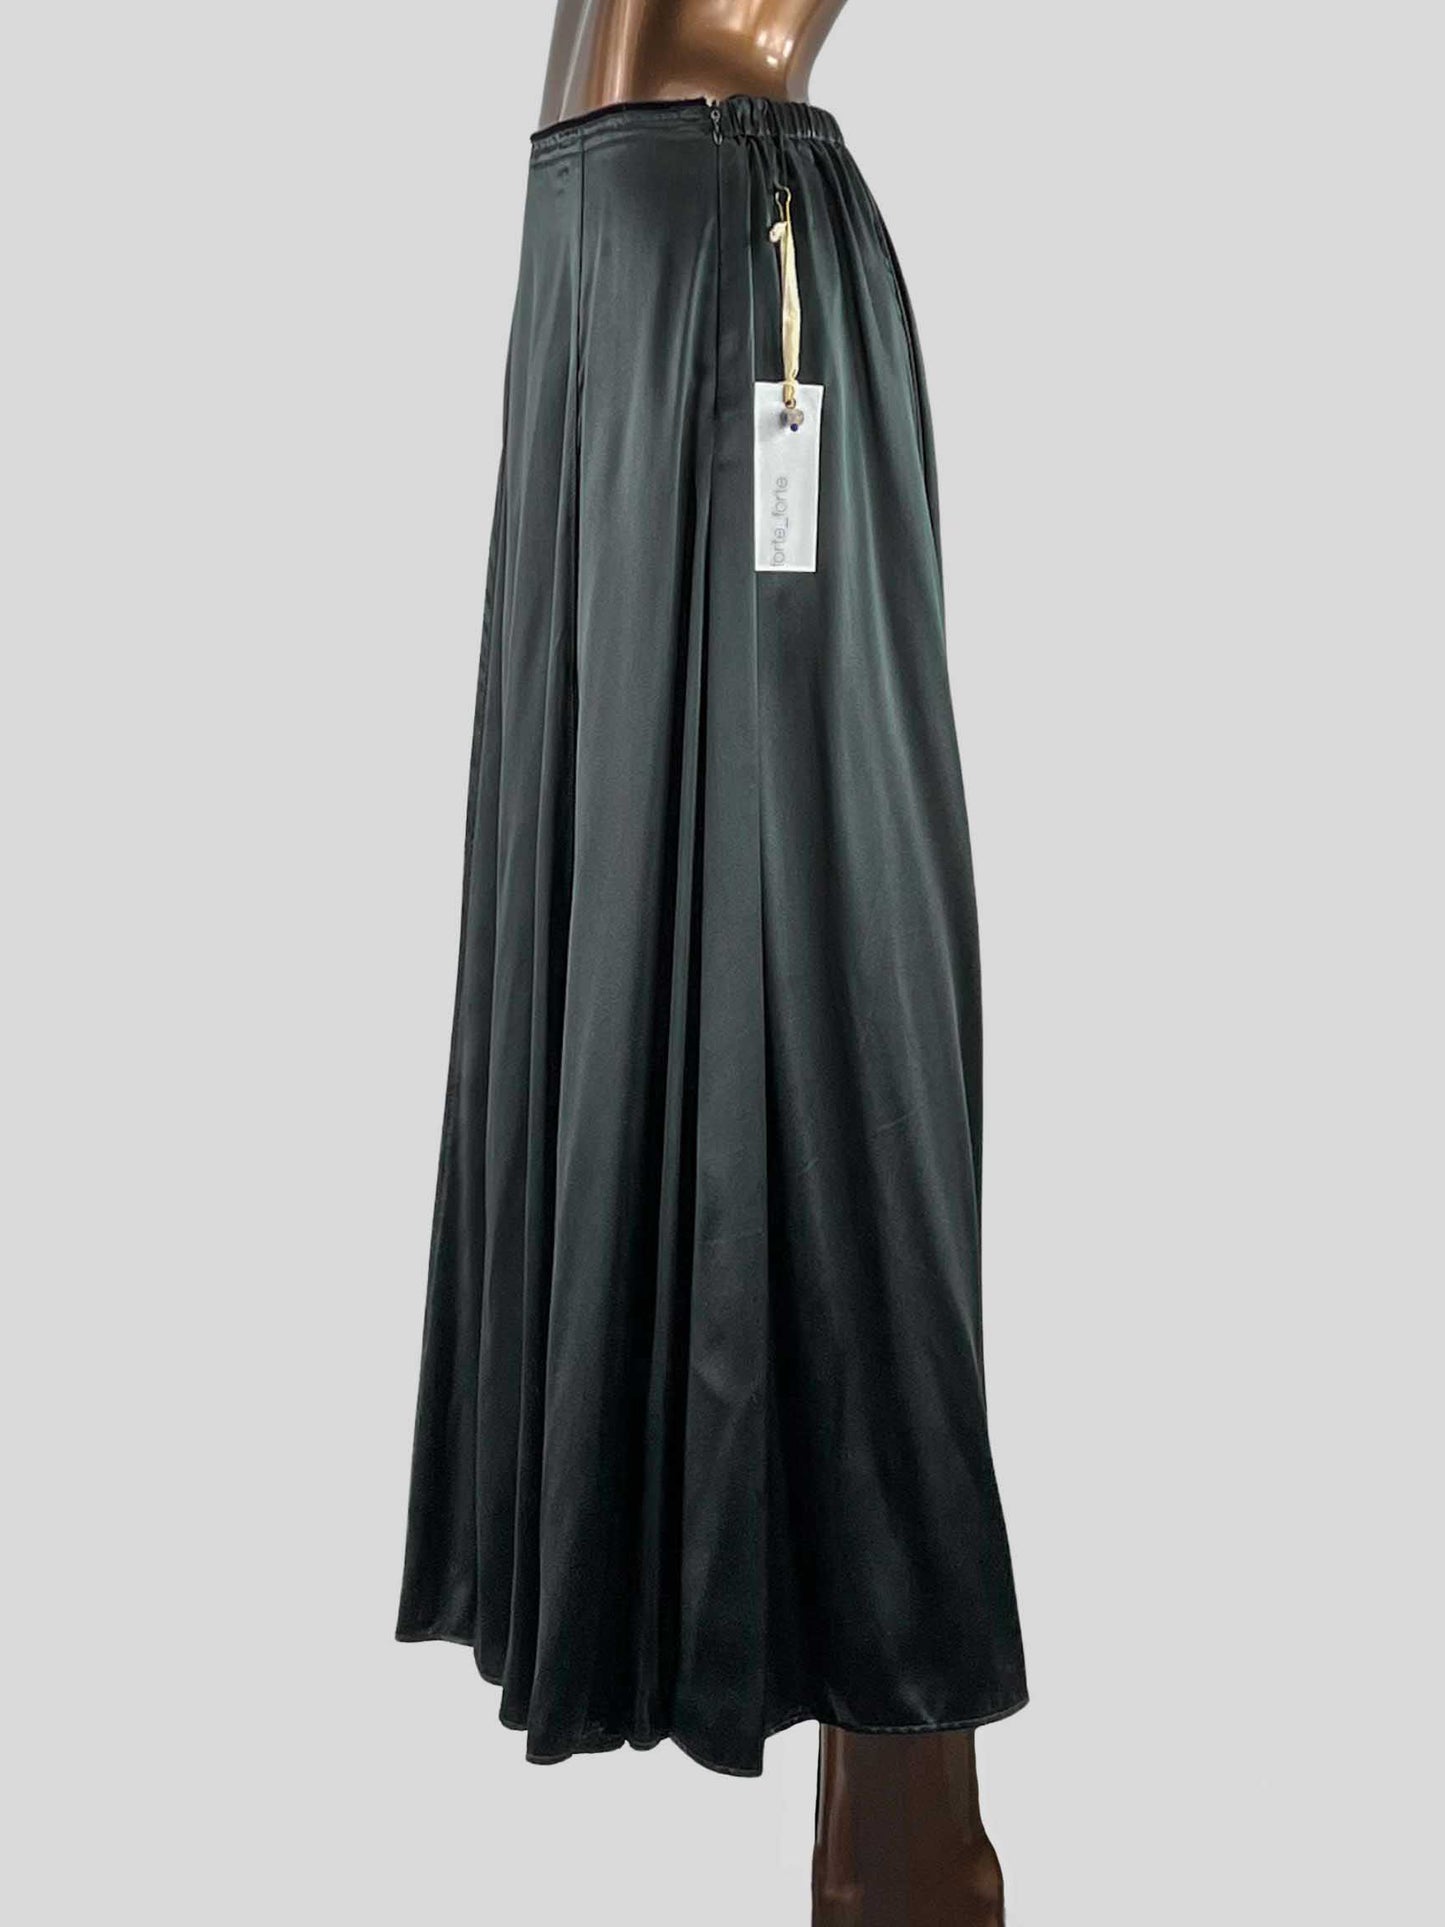 FORTE FORTE Satin Maxi Skirt w/ Tags - 0 | X-Small